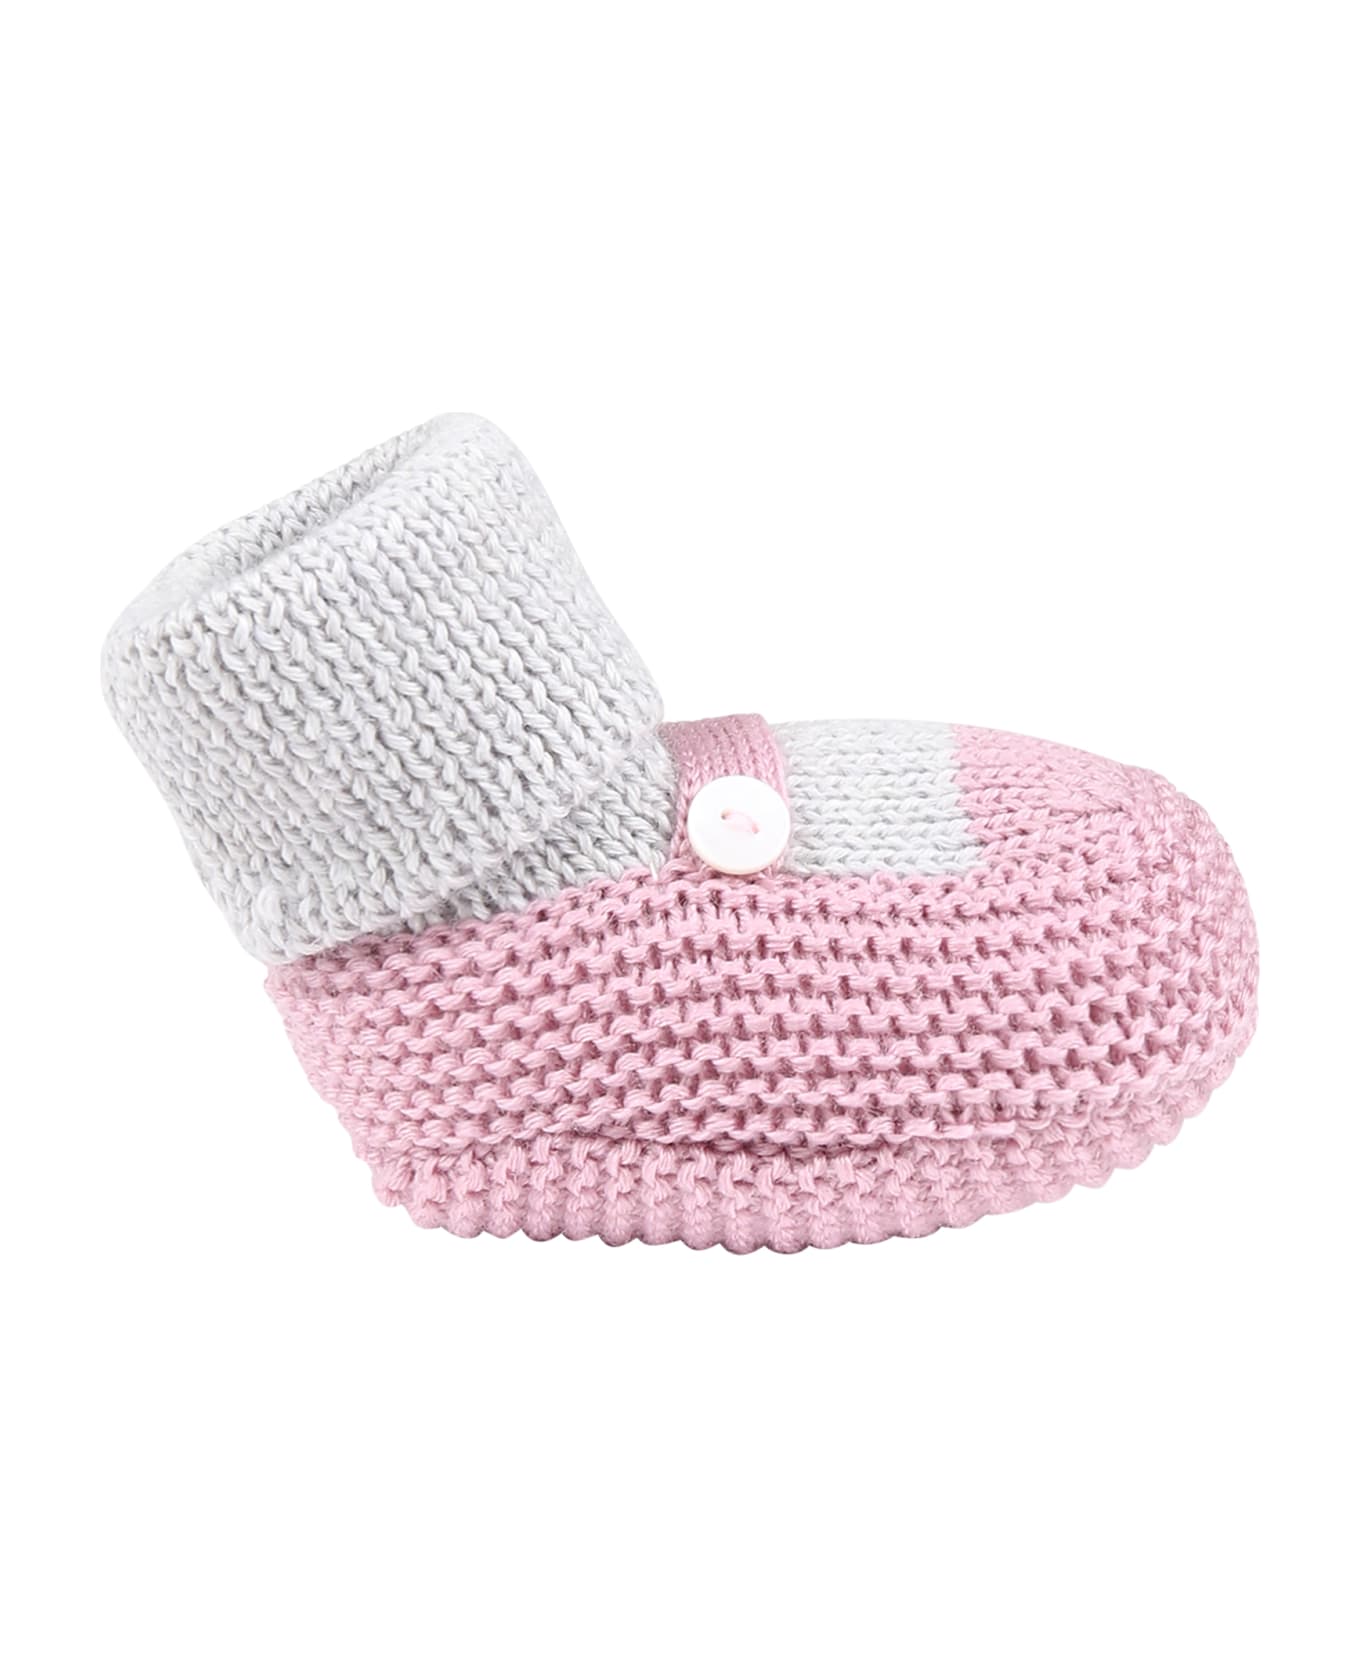 Little Bear Pink Slippers For Baby Girl - Multicolor アクセサリー＆ギフト